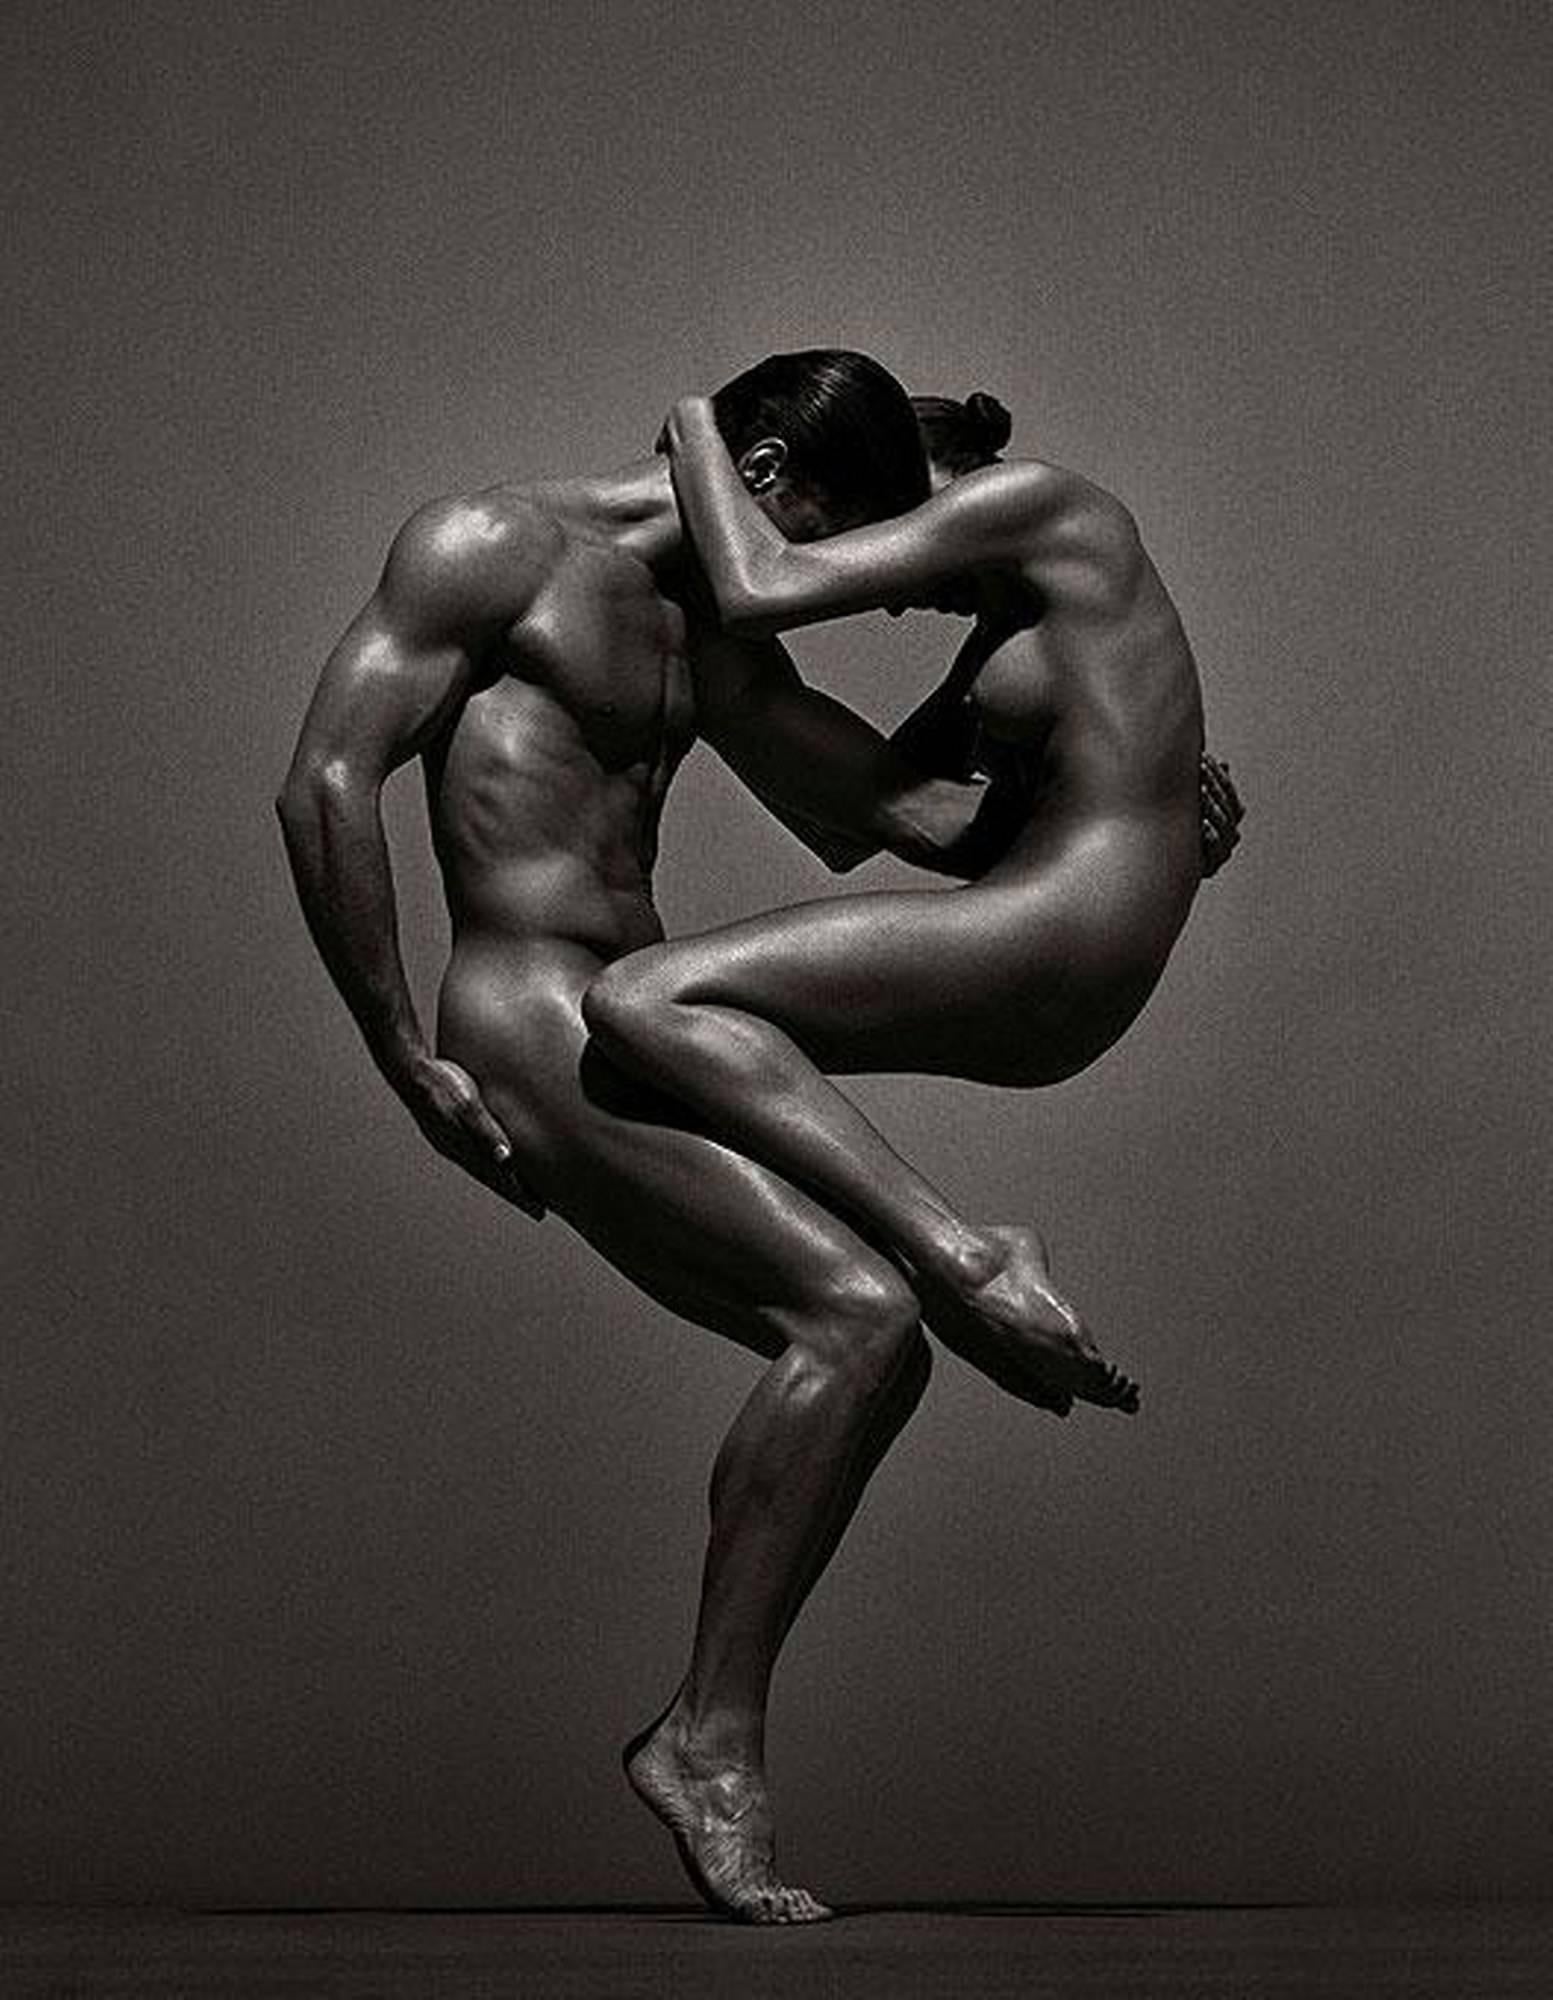 Sina&Anthony, Vienna - douple nude in athletic pose, fine art photography, 1995